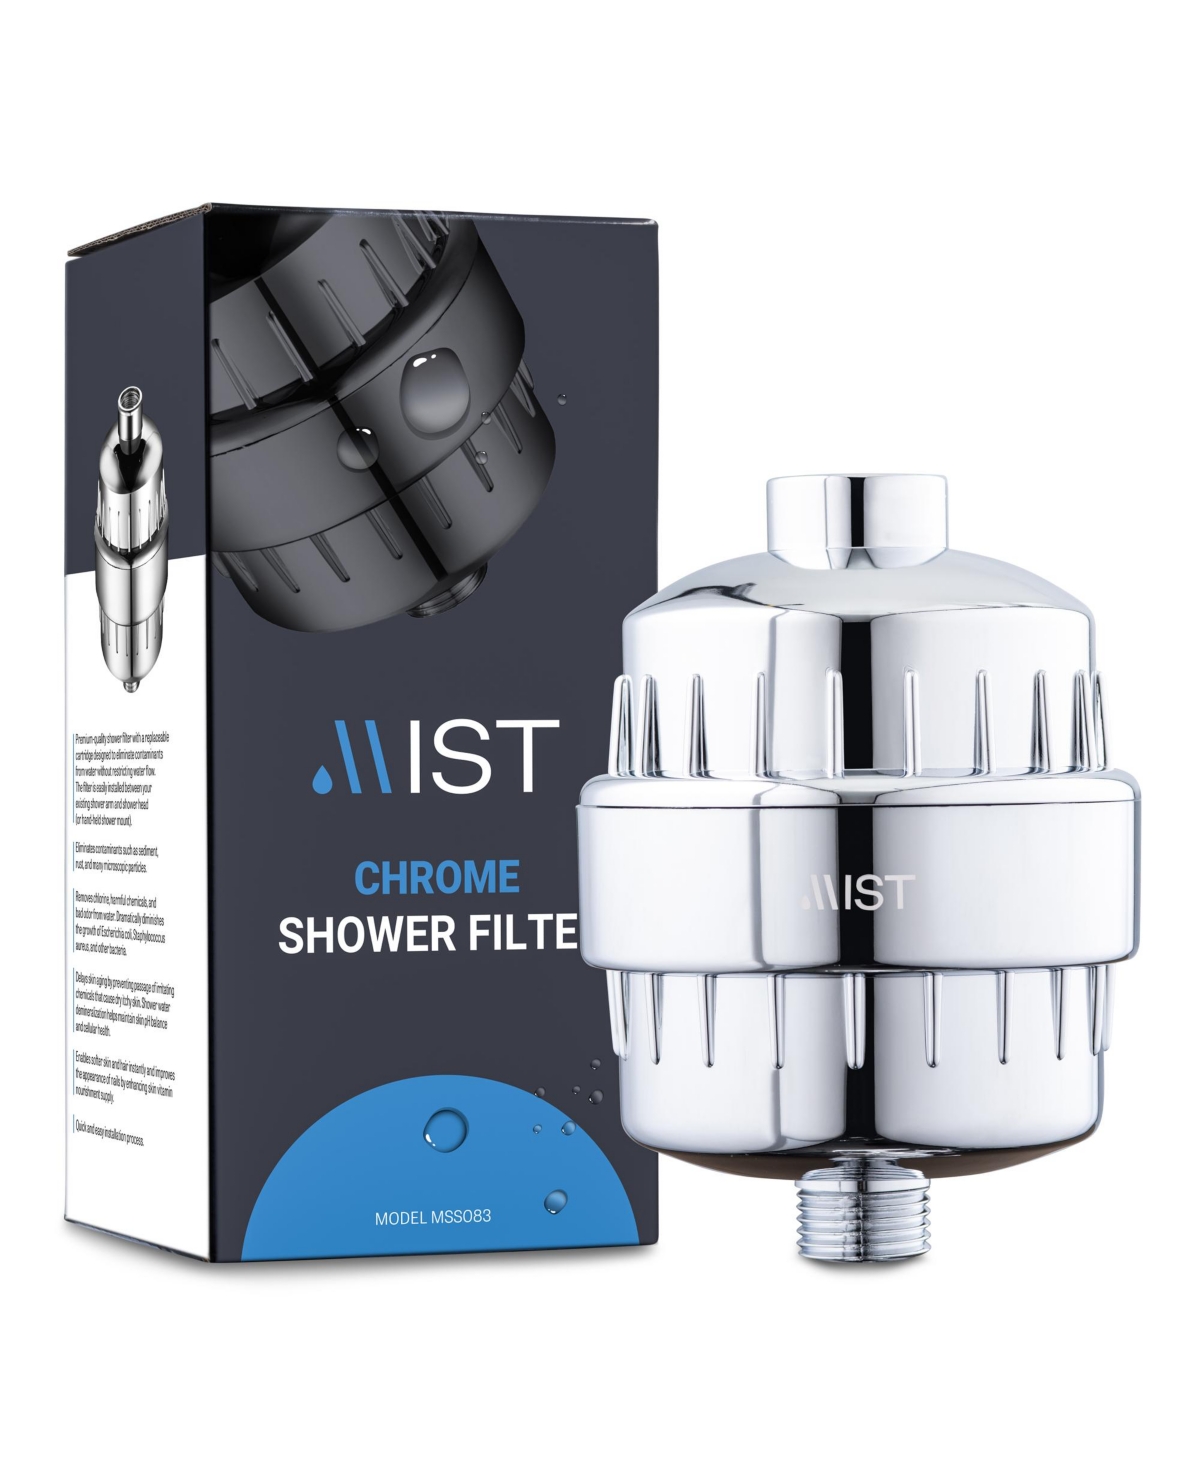 Water Softening Chrome Shower Filter, 2 Filter Cartridges, 15 Stage Filtration System Removes Chlorine Fluoride, Bad Odor, Reduces Dry Itchy Skin